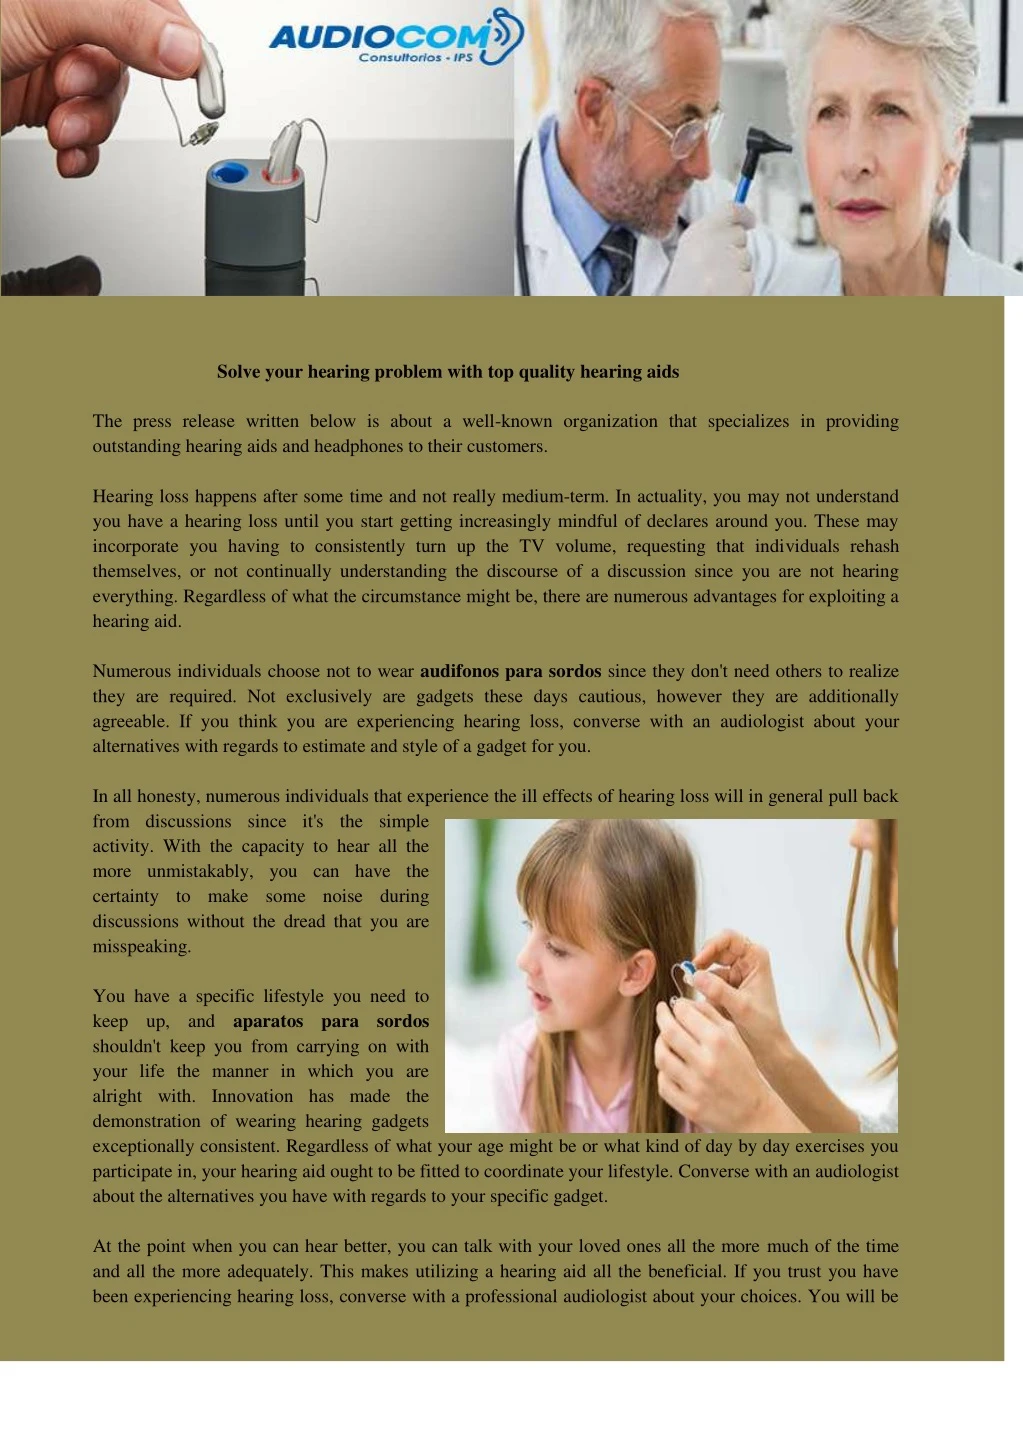 solve your hearing problem with top quality